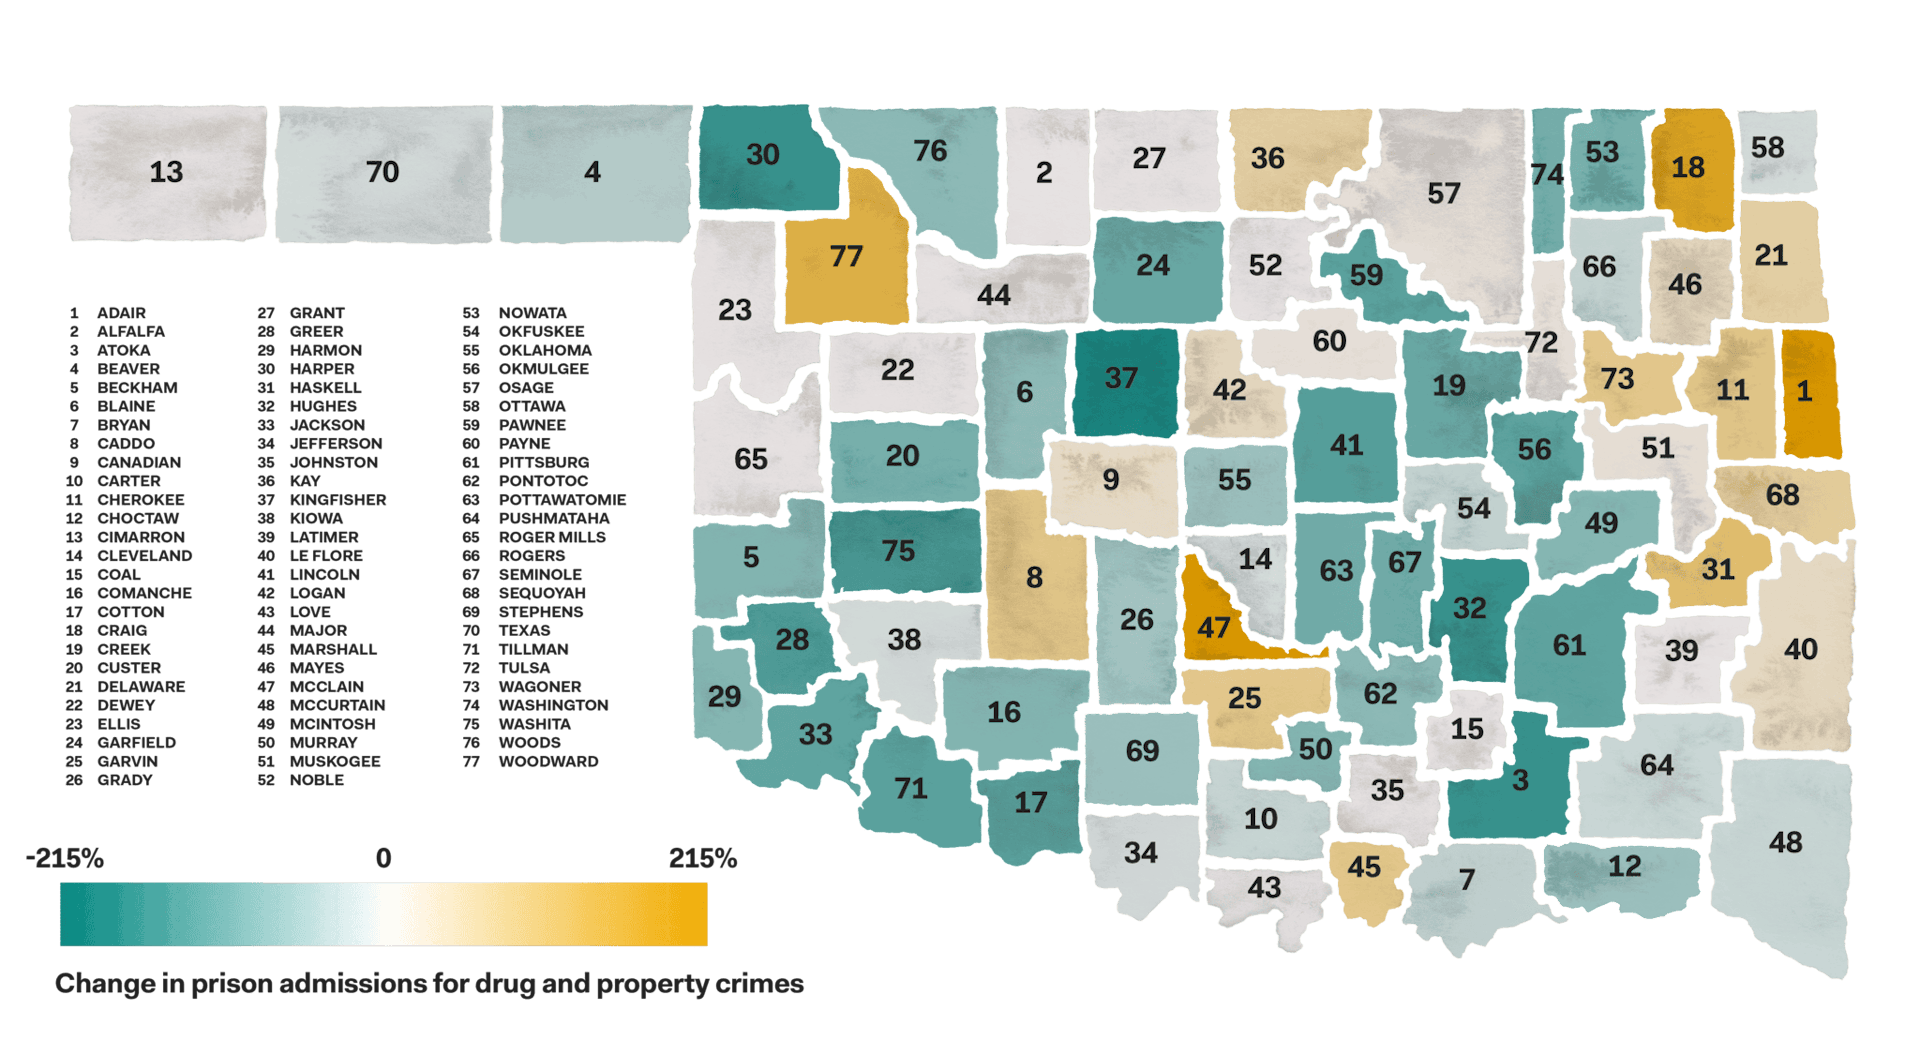 Map of Change in drug and property admissions for new court commitments, FY16 - FY19 by County